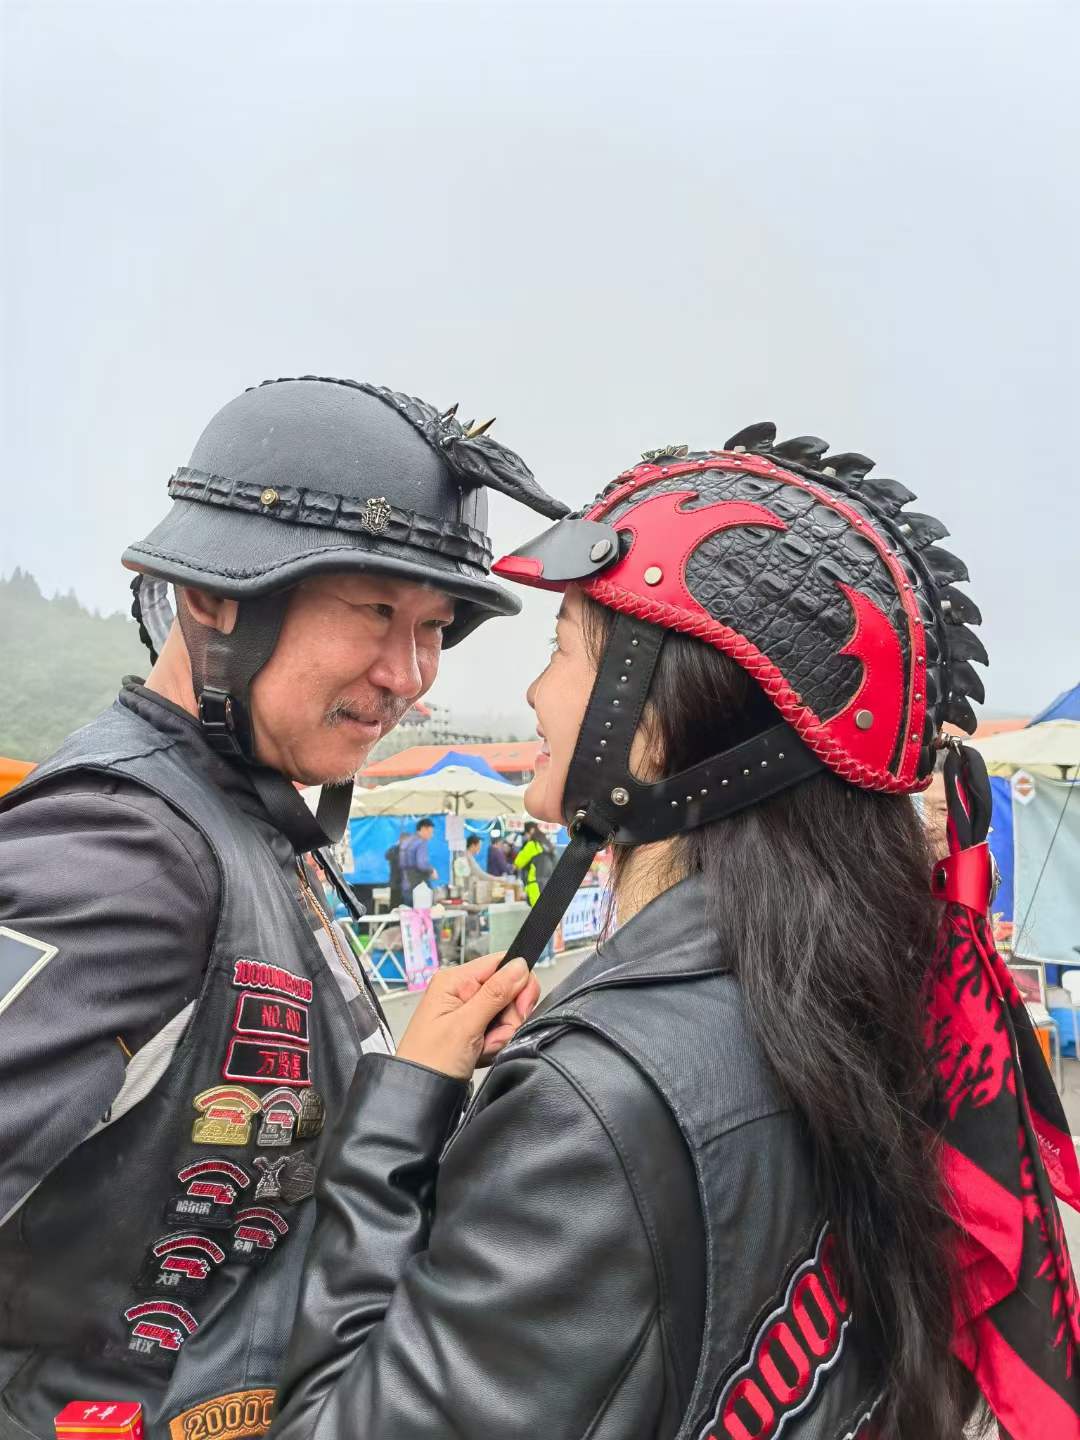 Riding into Forever: How a Motorcyclist Holds a Wedding